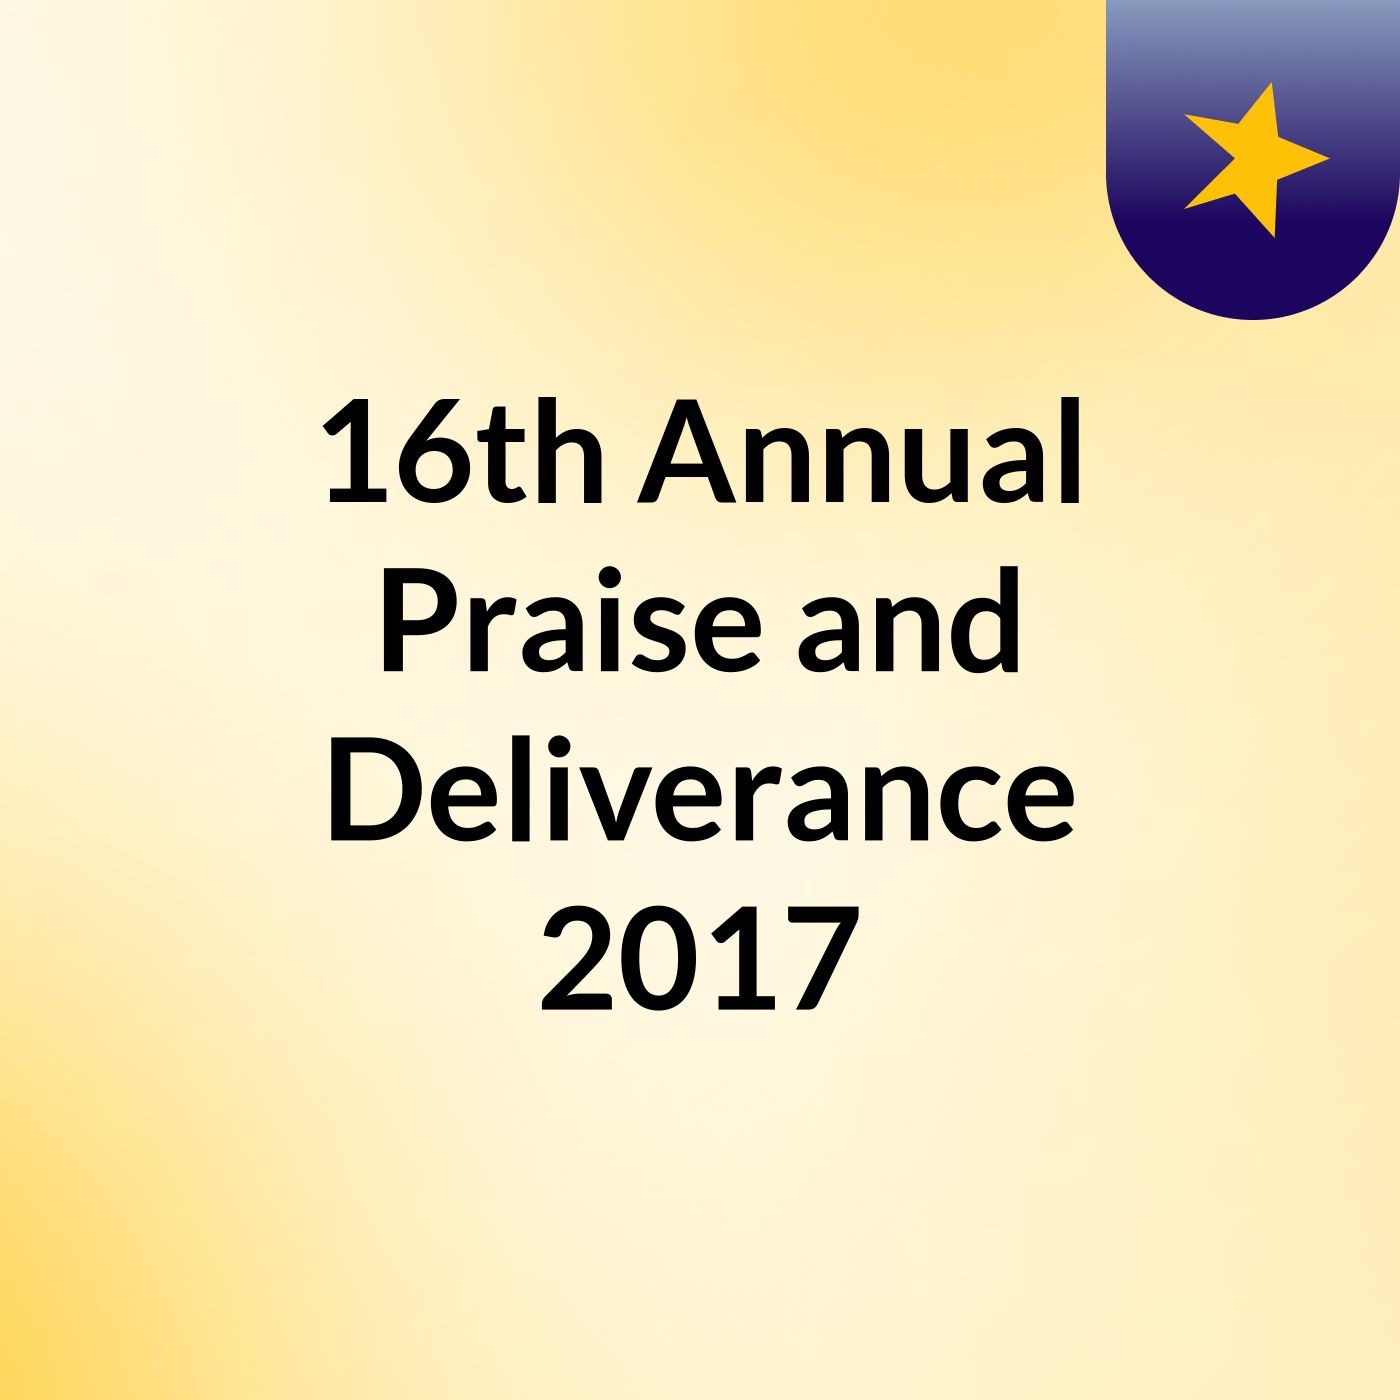 16th Annual Praise and Deliverance 2017